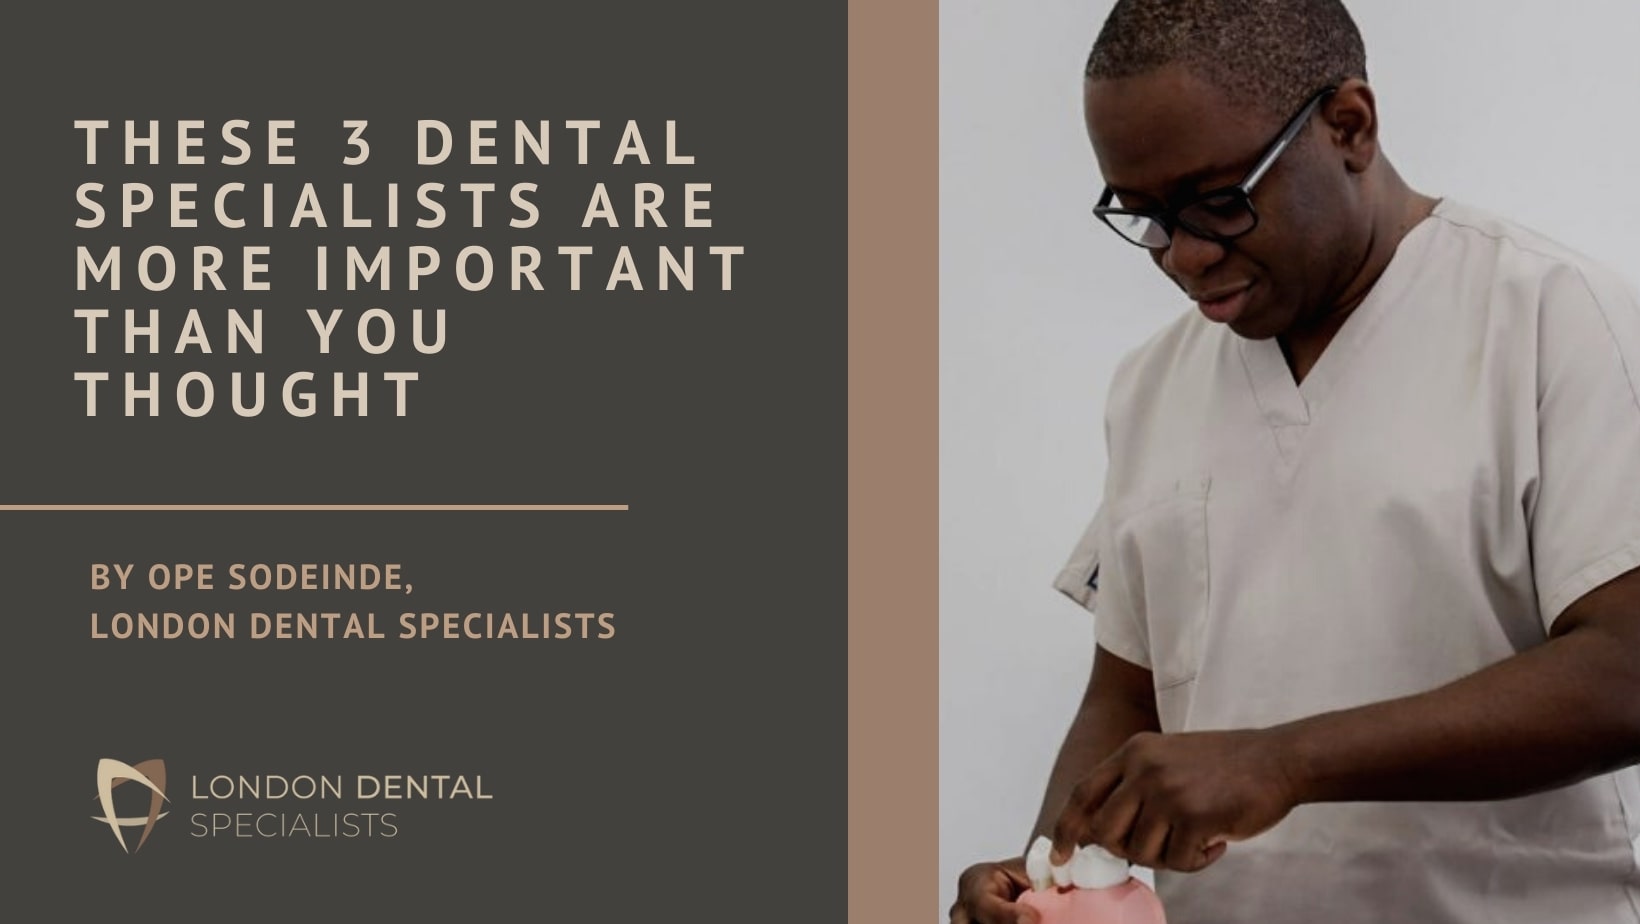 These 3 Dental Specialists Are Much More Important Than You Think